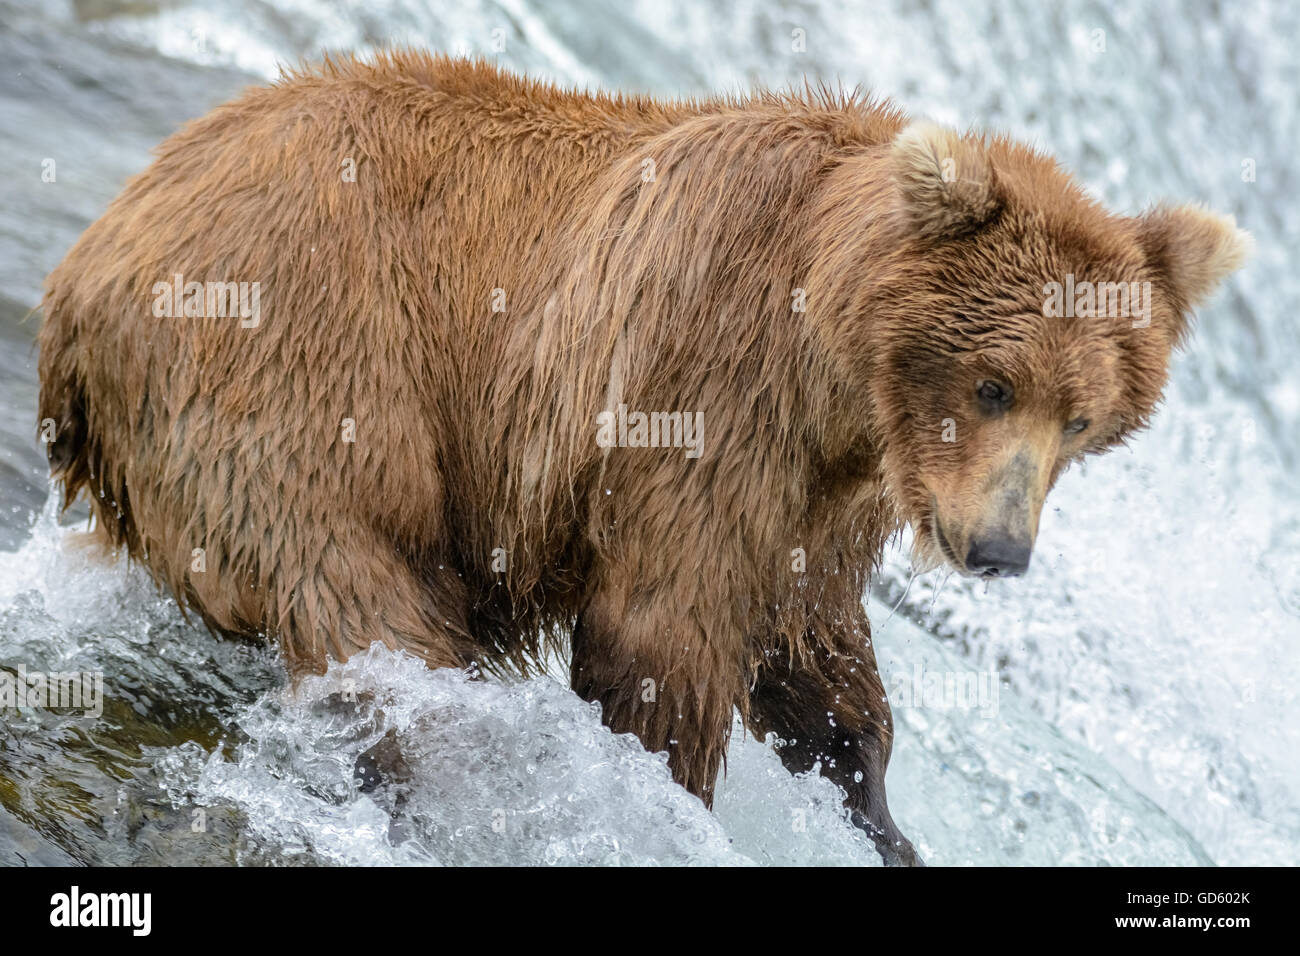 Grizzly bear catching salmon at the top of a waterfall, Brook Falls, Alaska Stock Photo